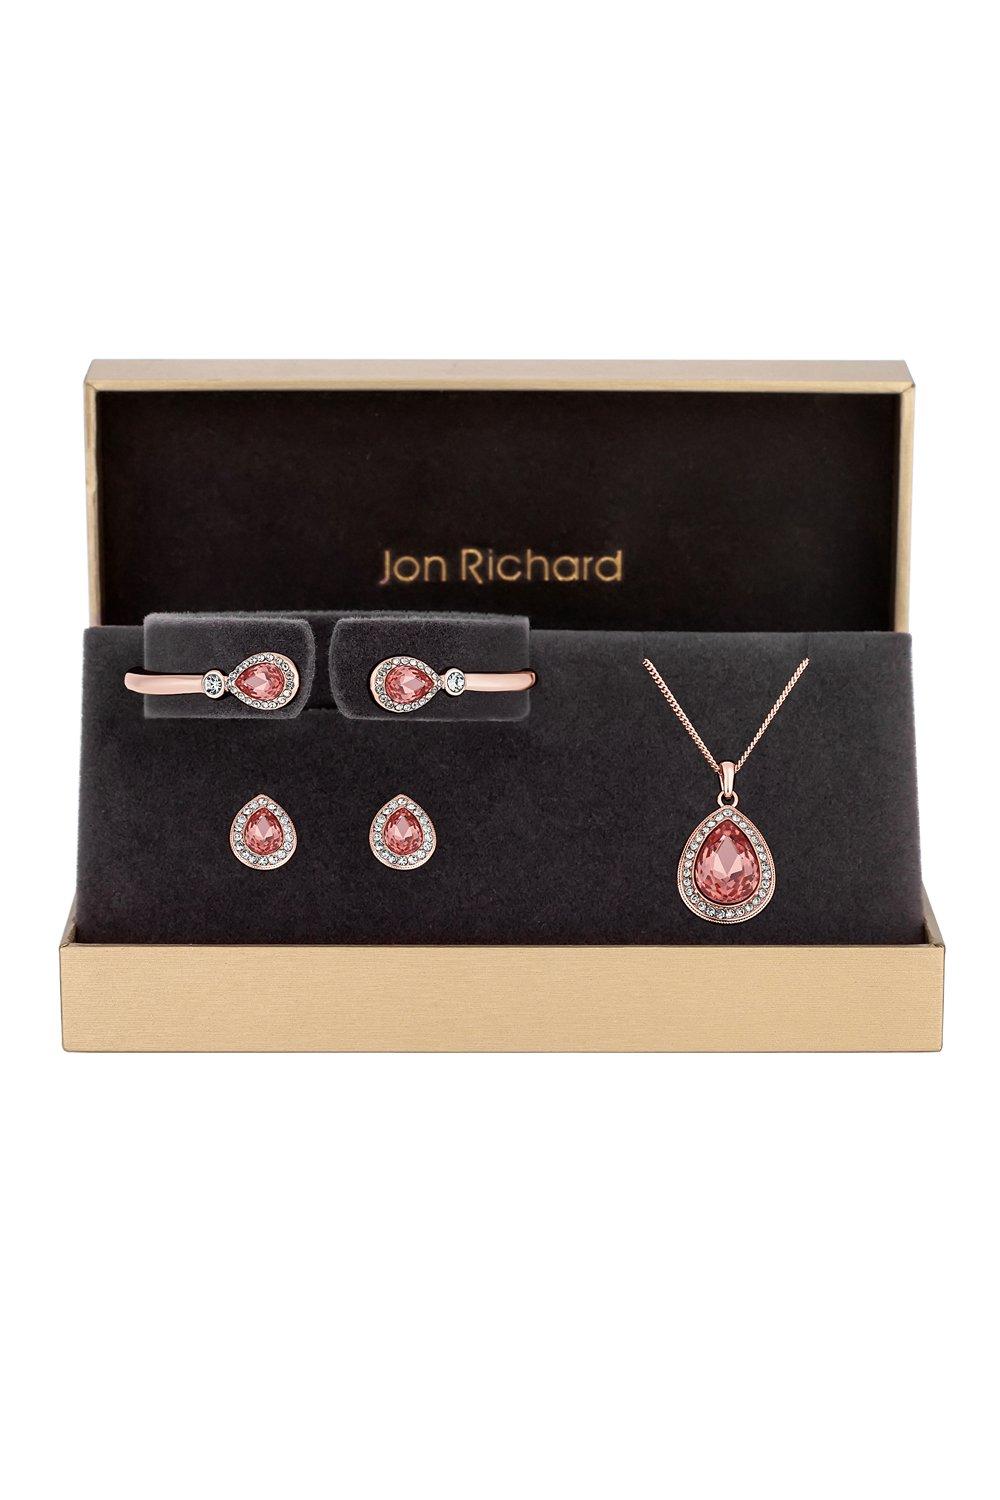 Jon Richard Women's Rose Gold Plated With Pink Pear Crystals Trio Set - Gift Boxed|pink